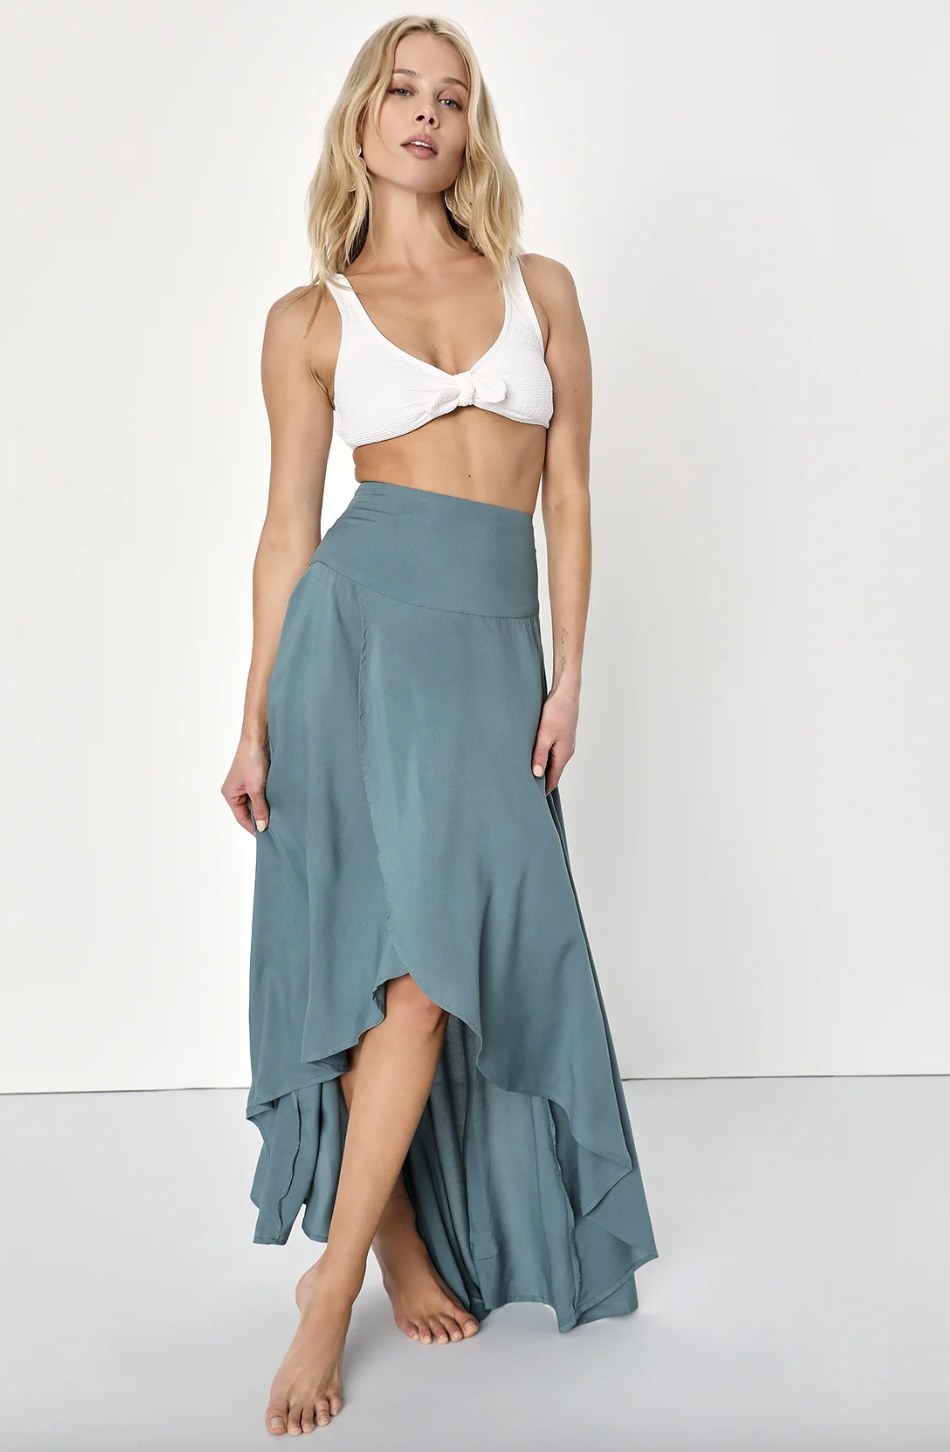 A model wearing the skirt in a grey blue color